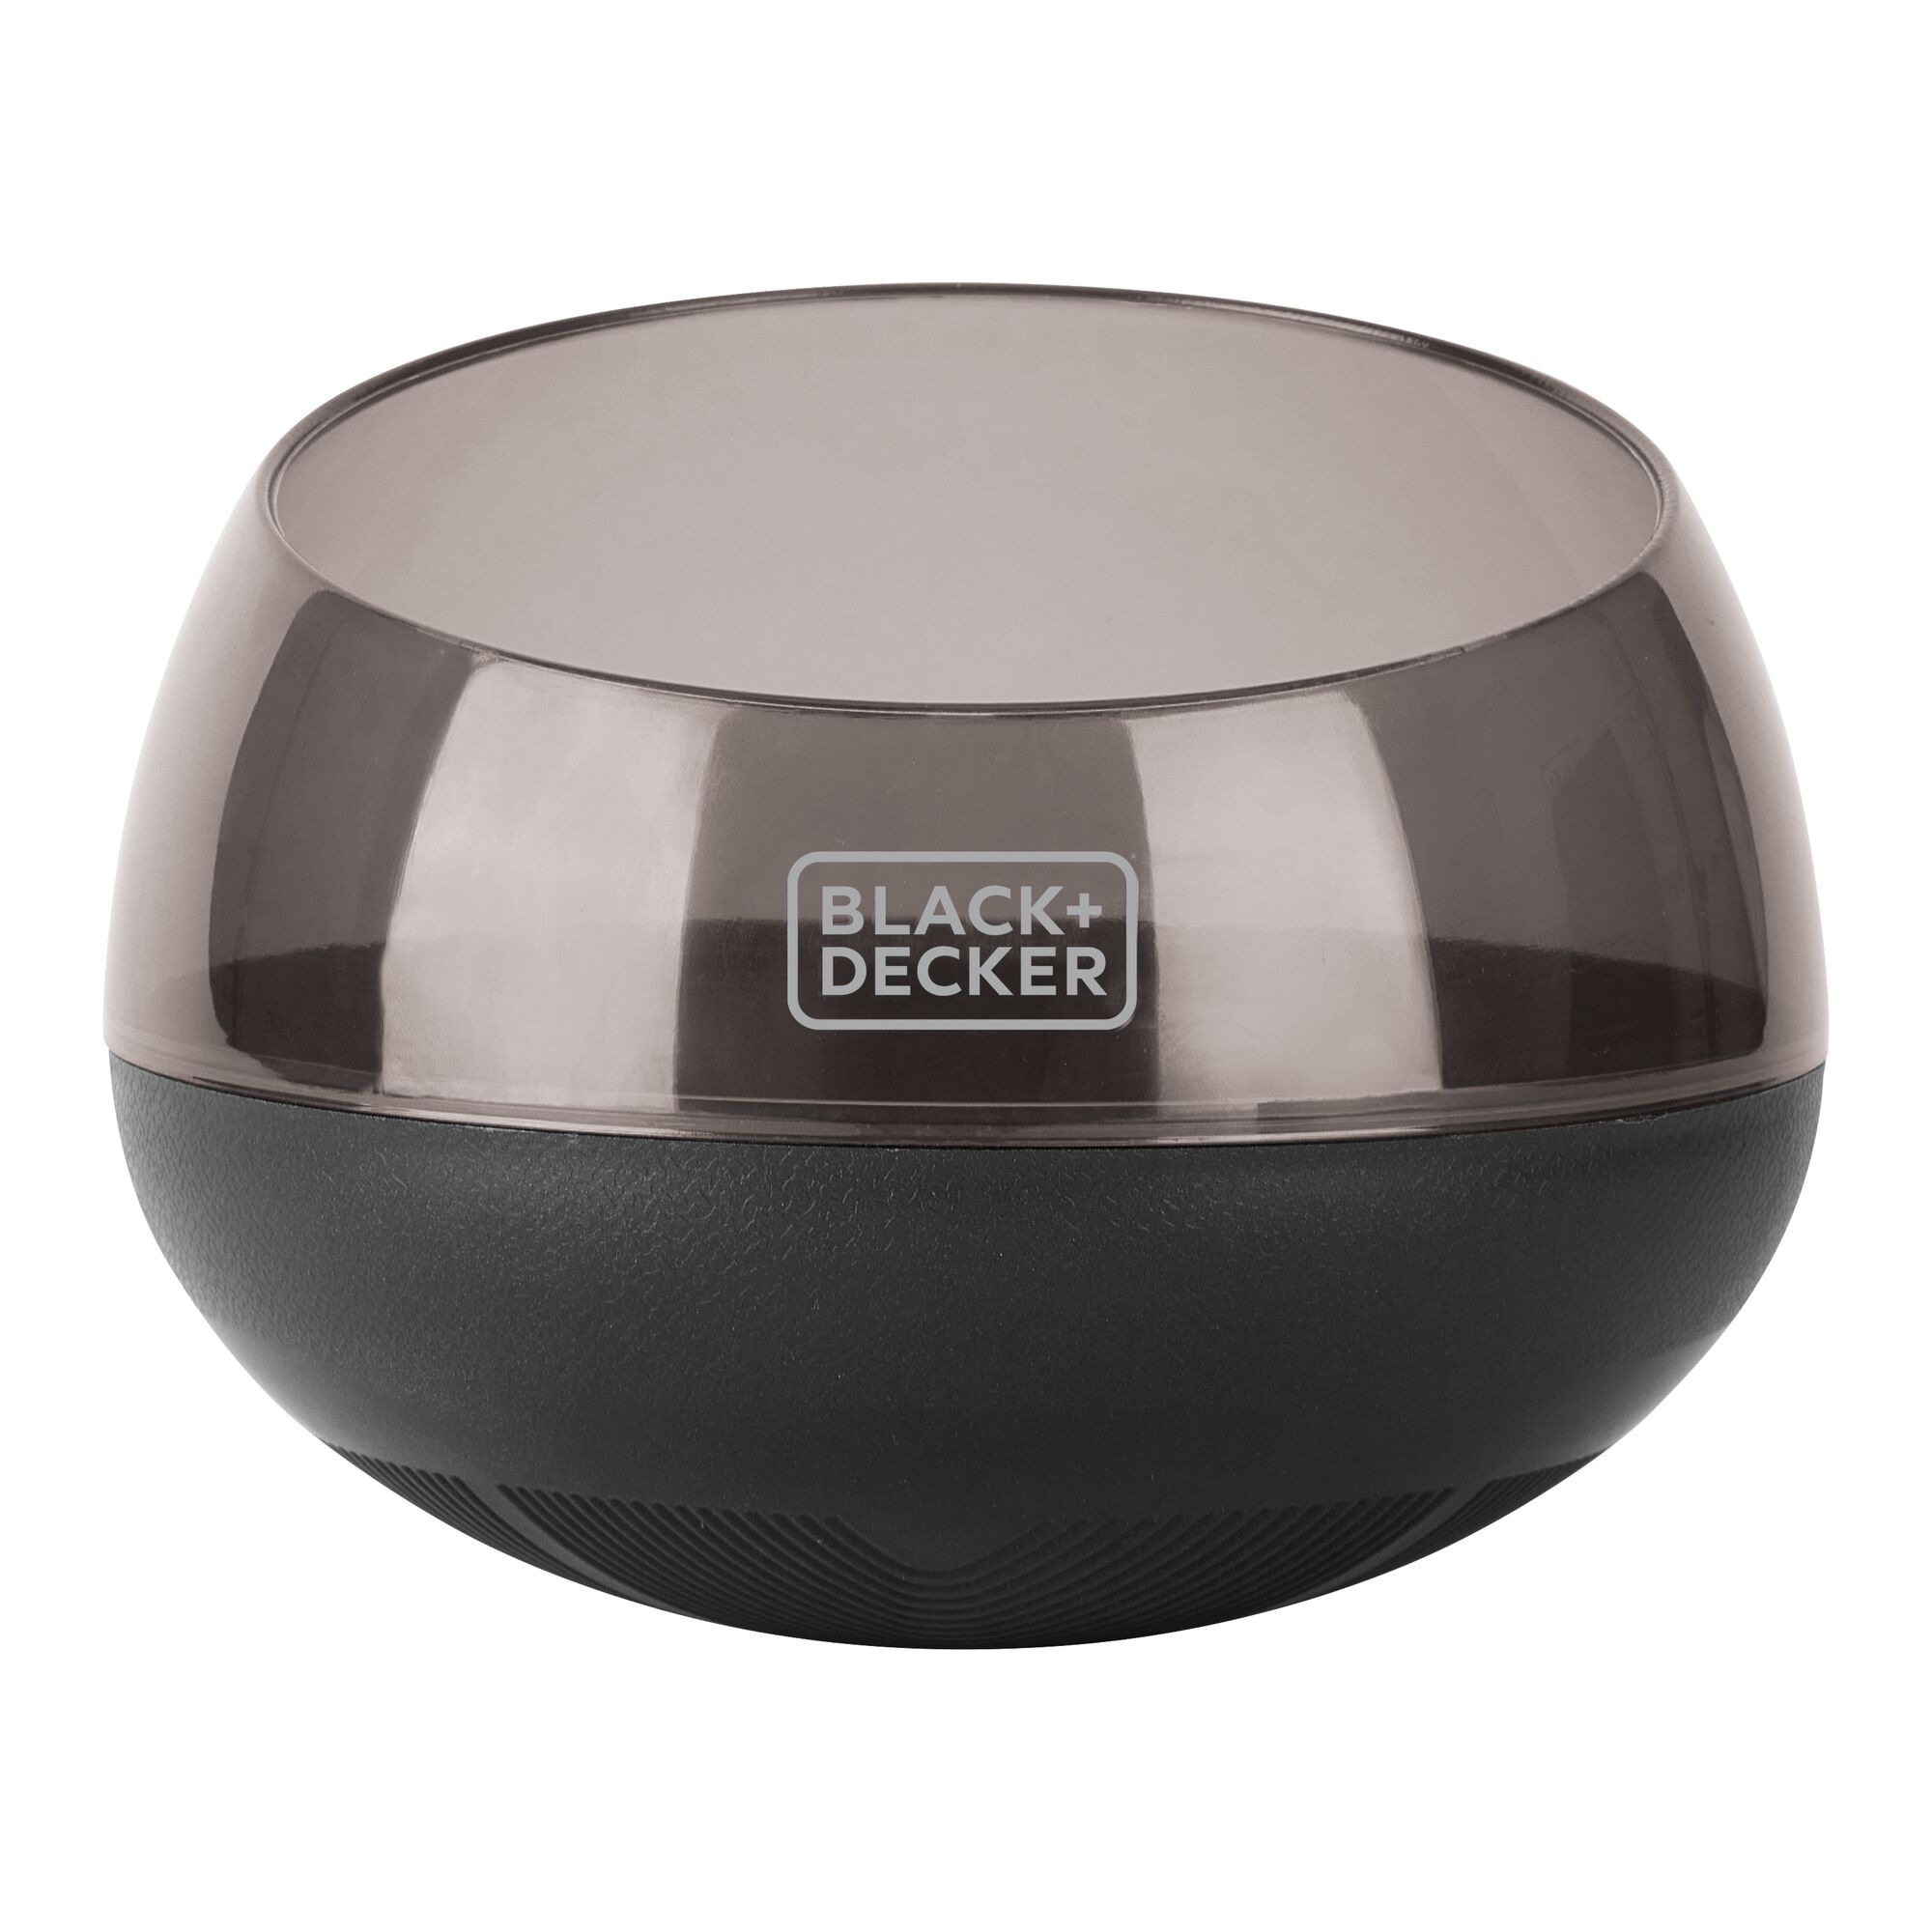 Side profile view of the BLACK+DECKER slow feeder rocking bowl